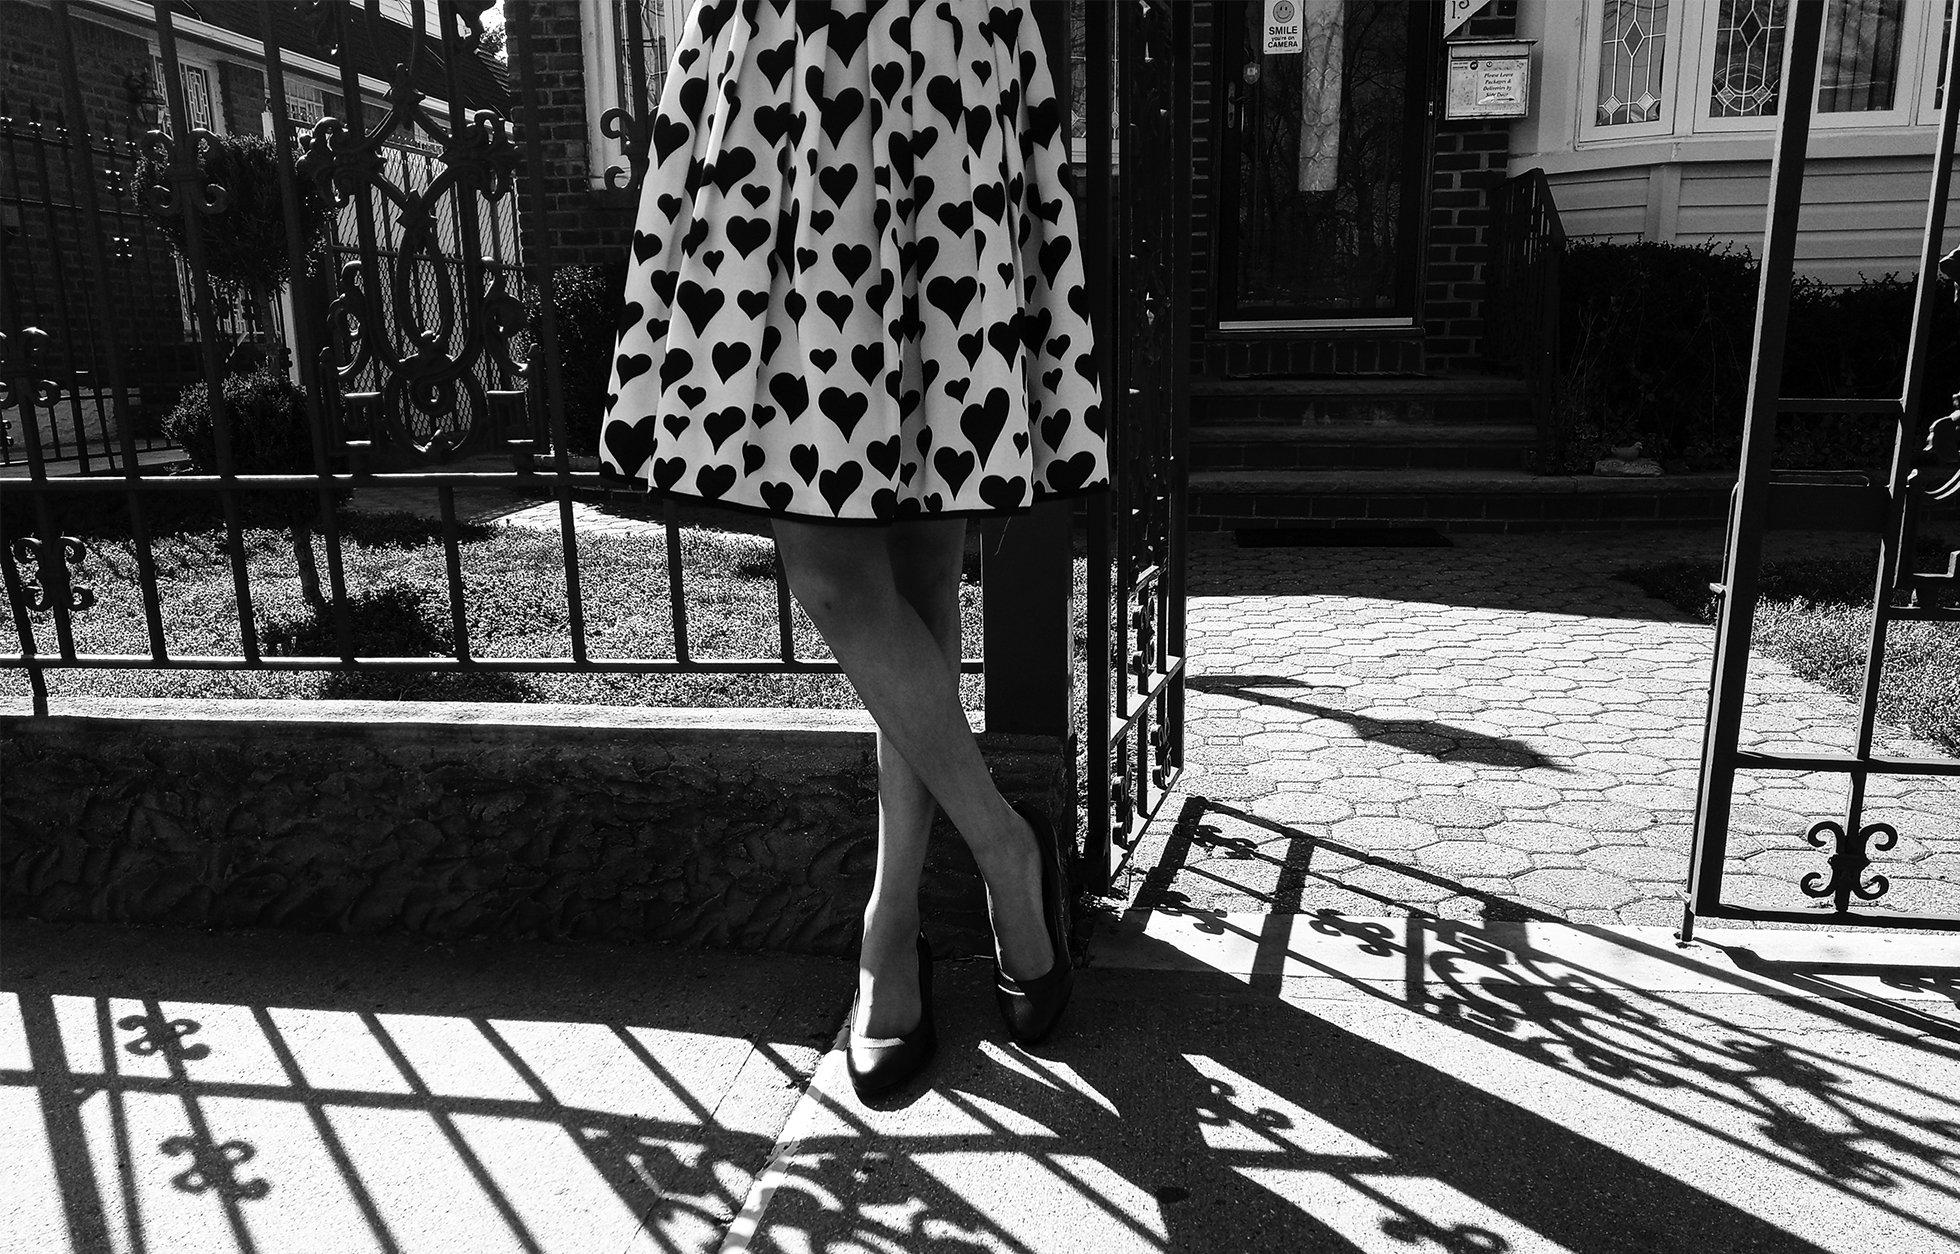 A woman stands with her legs crossed near a wrought-iron gate in front of a house. She is shown from the waist down. She is wearing a white dress with hearts all over it and a pair of pumps.